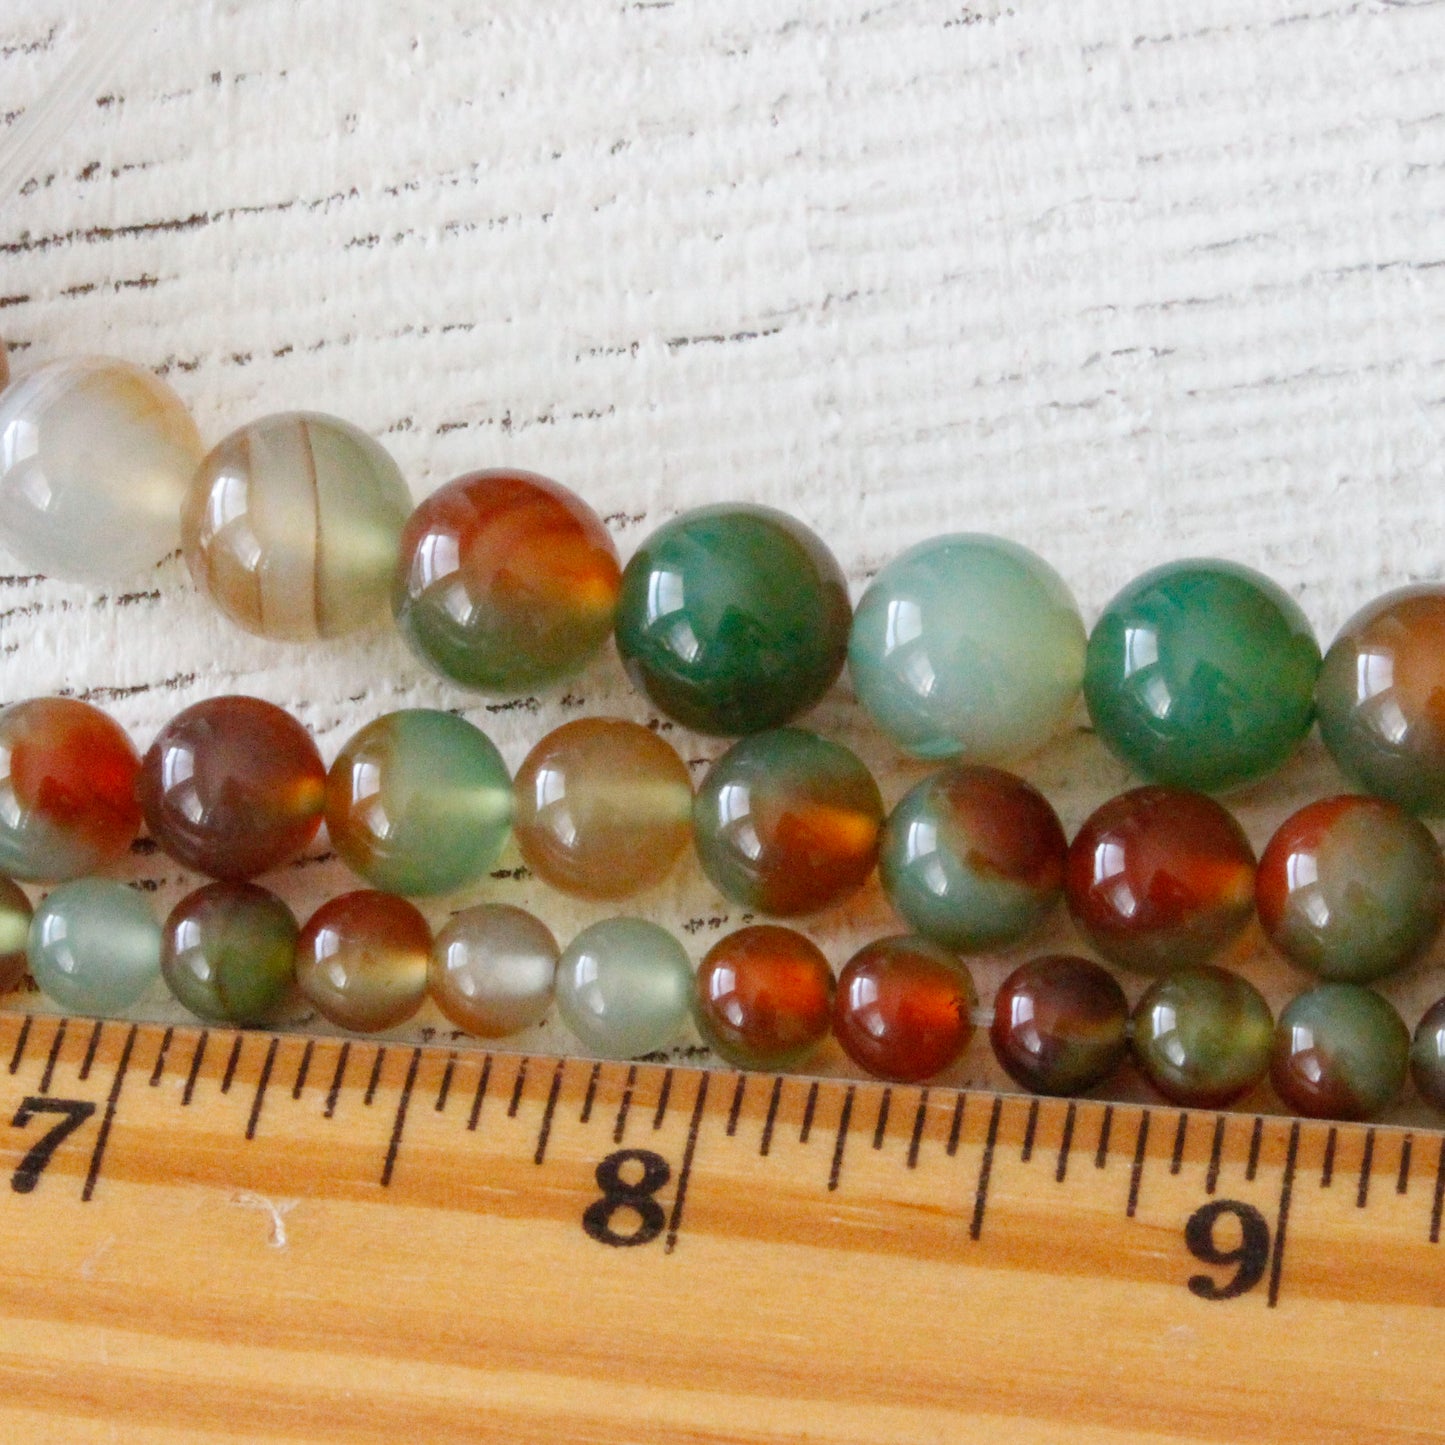 8mm Agate Beads - Orange and Green Mix -  16 Inches